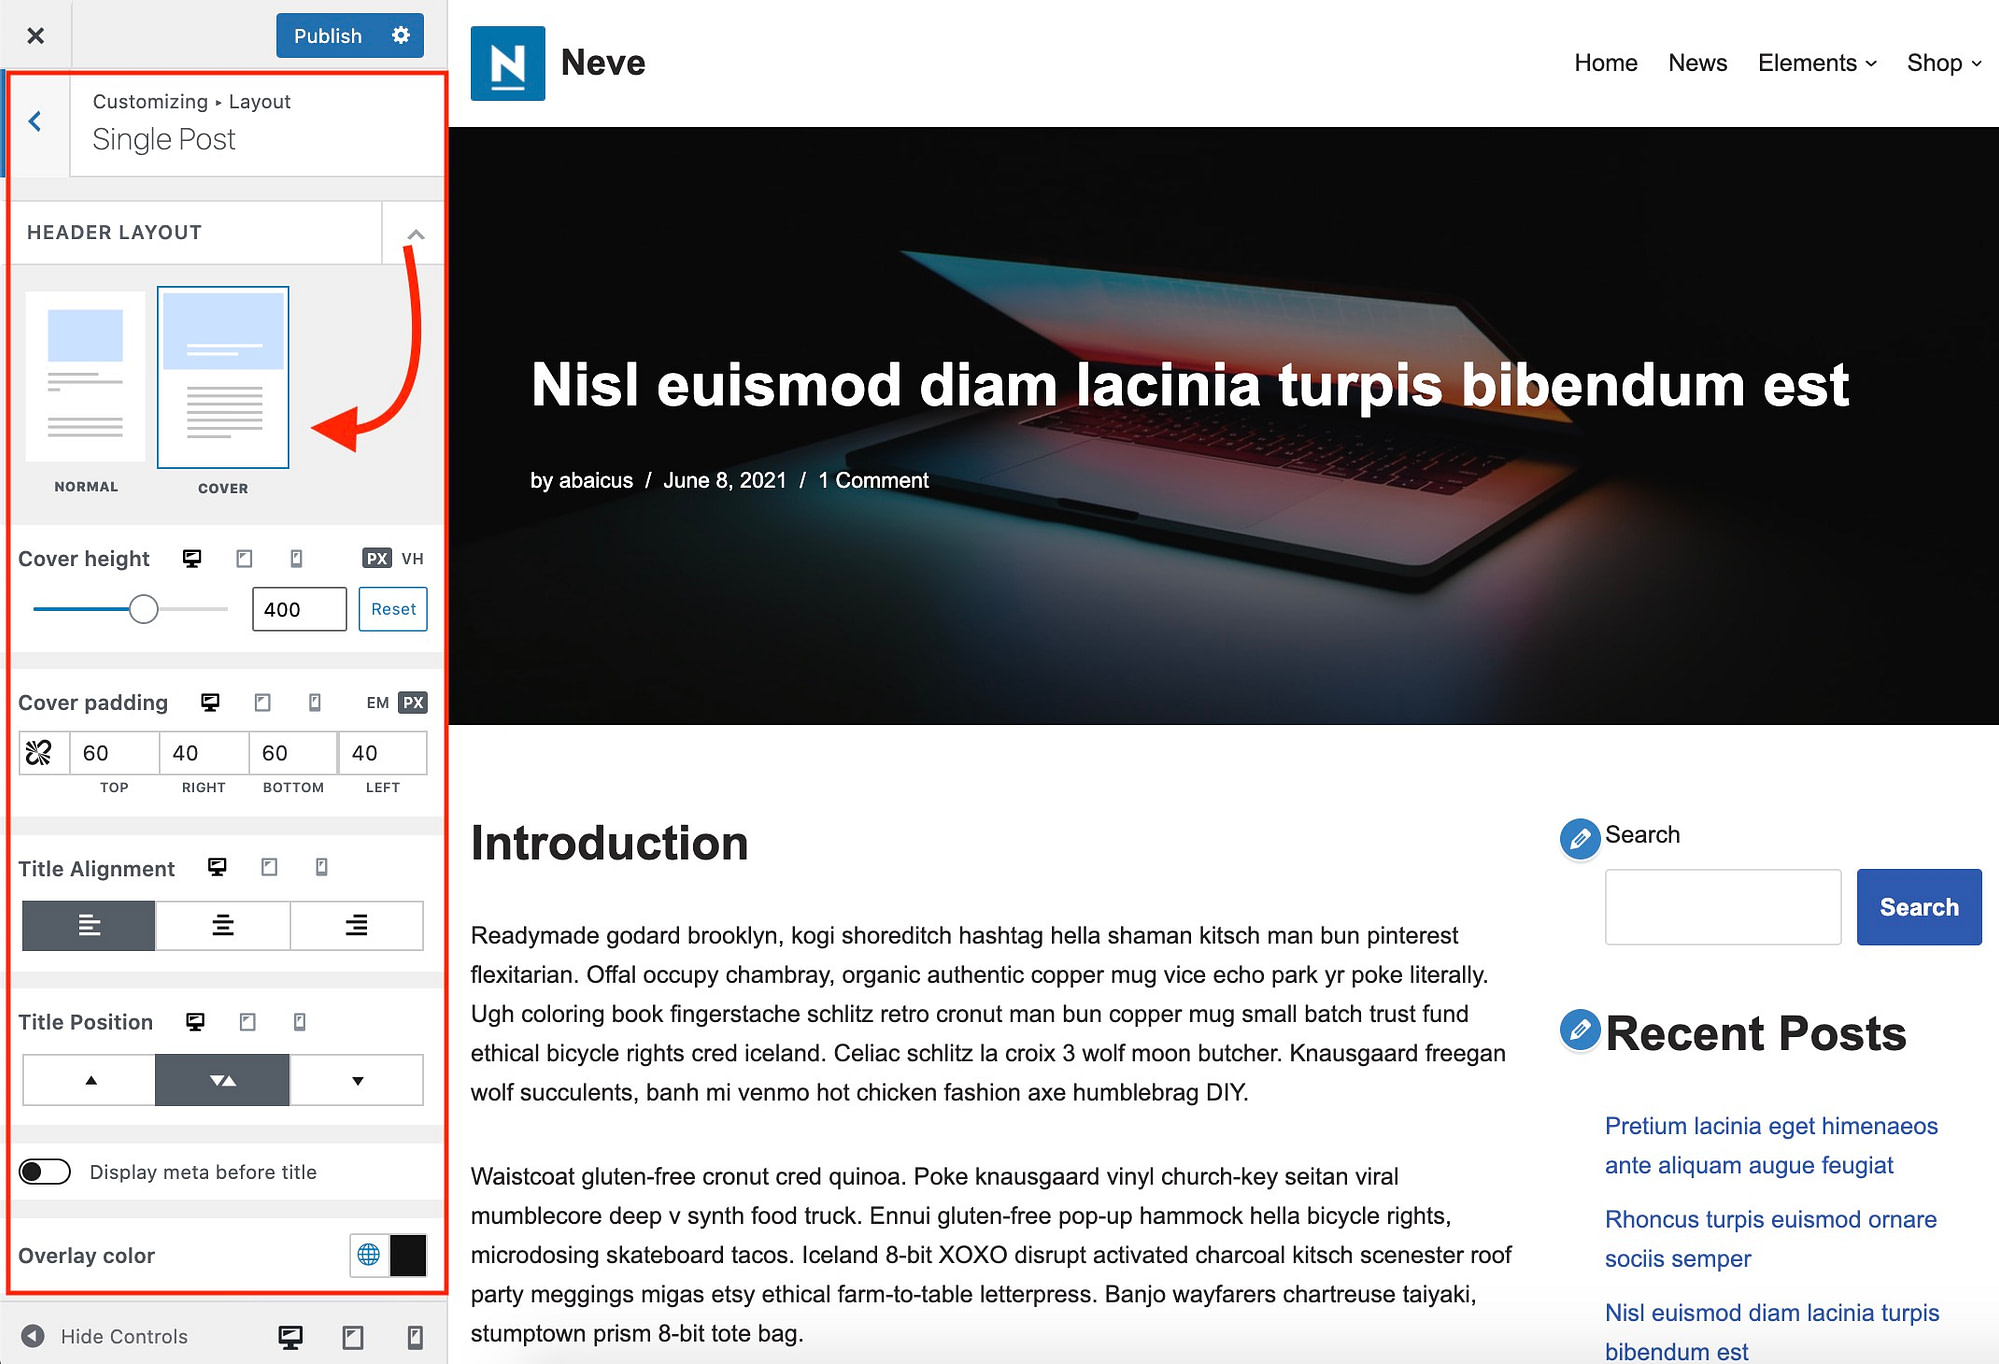 Neve 3.0 brings a new range of layout options to your blog posts and product pages